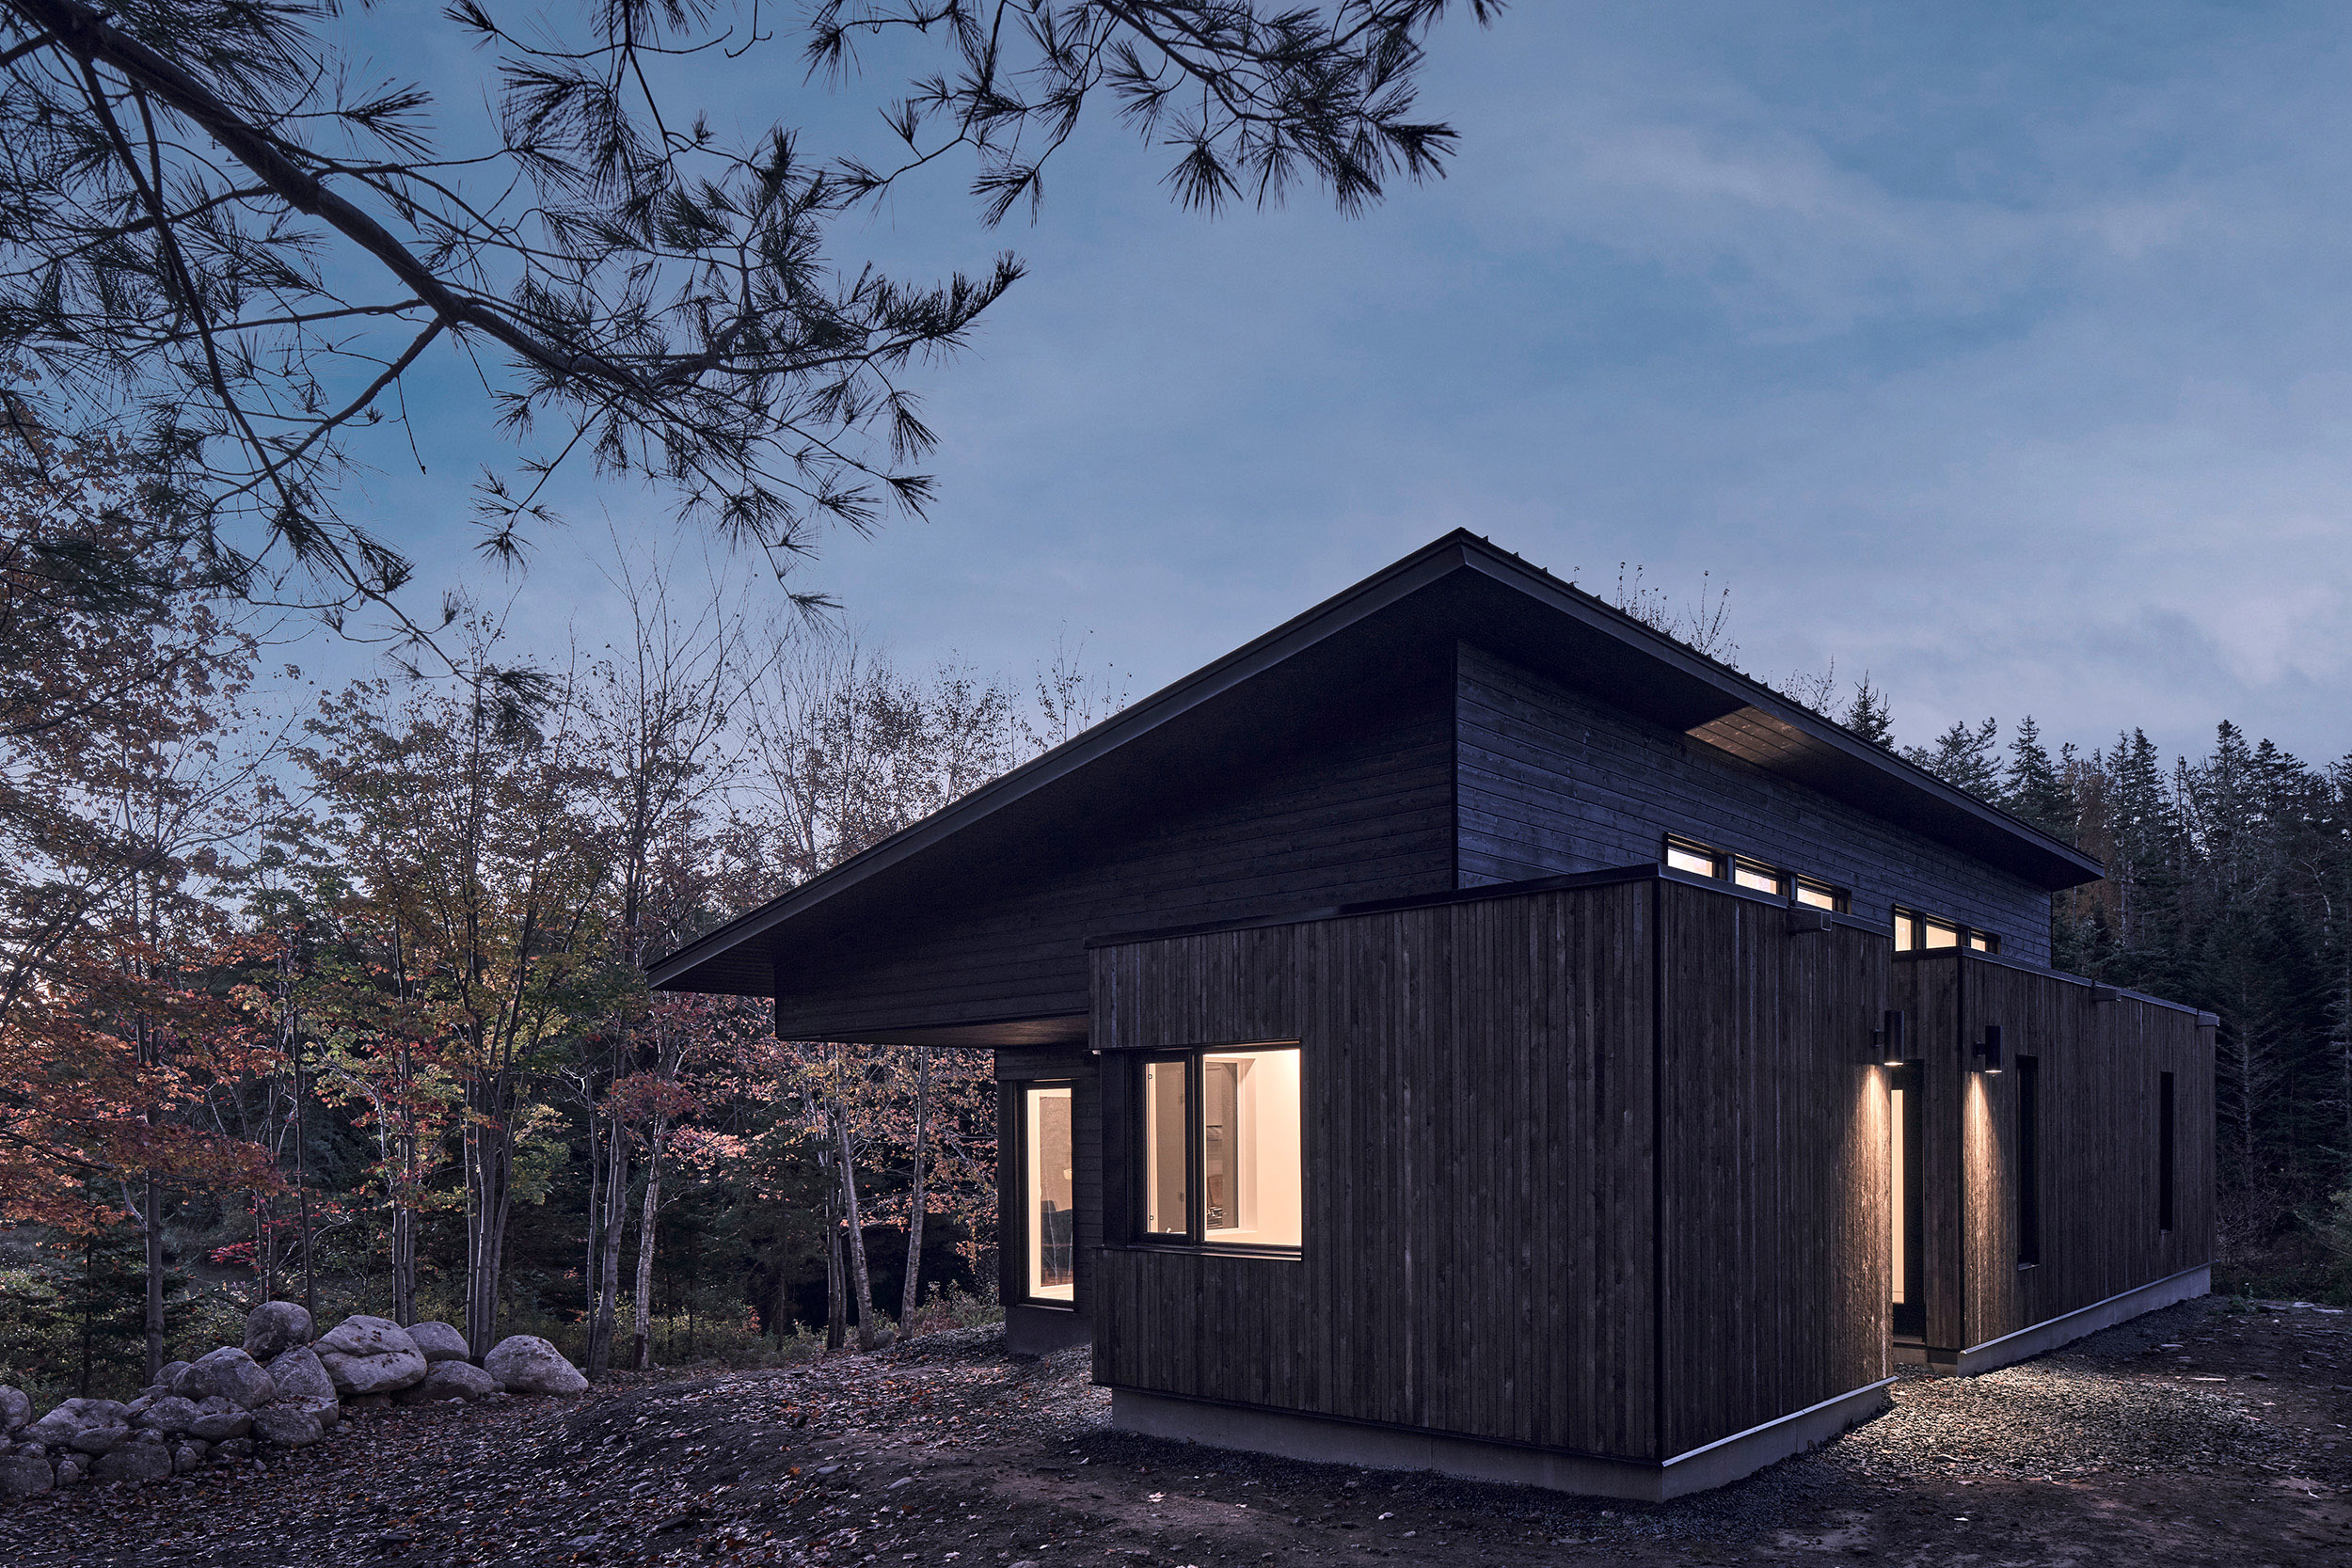 CABIN IN THE WOODS BY PB STUDIO